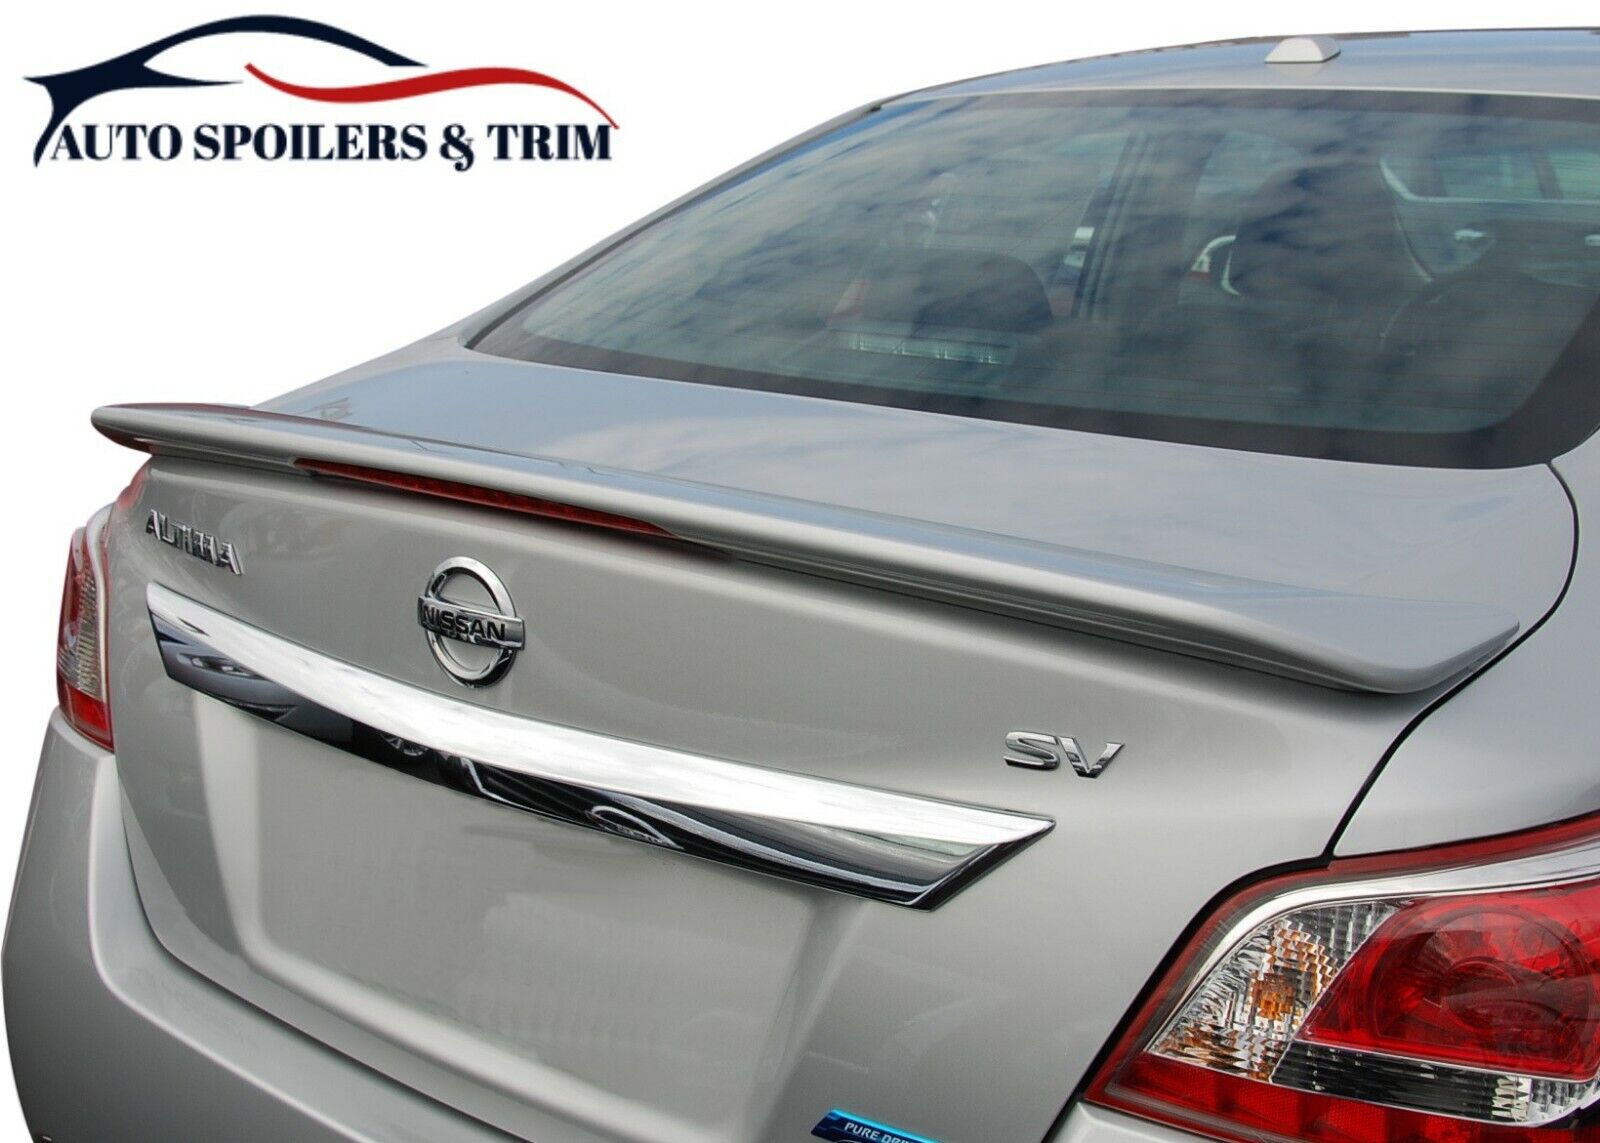 PAINTED FACTORY STYLE SPOILER - Fits The 2013 - 2015 NISSAN ALTIMA SEDAN #520